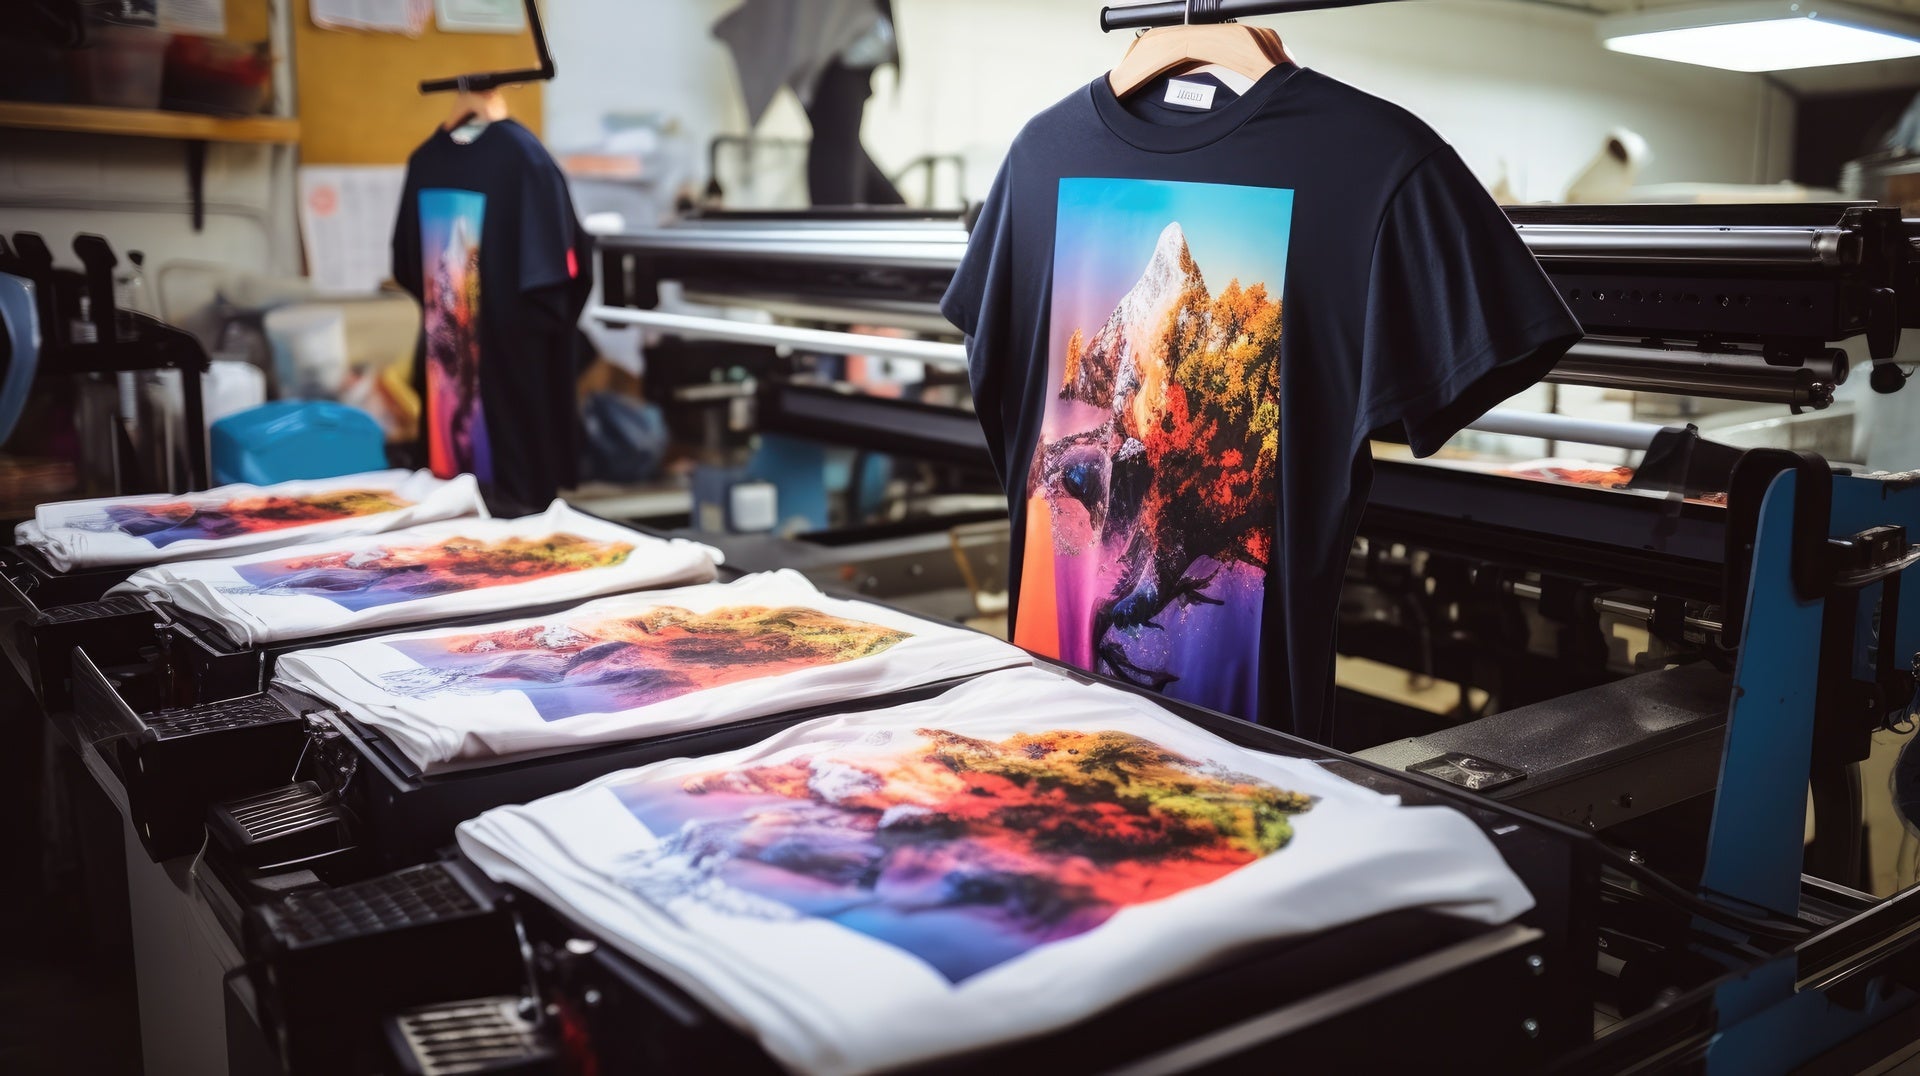 Creative entrepreneur using TNTprinthouse Print on Demand service to create custom t-shirts, emphasizing quality control and low risk business model for online businesses.